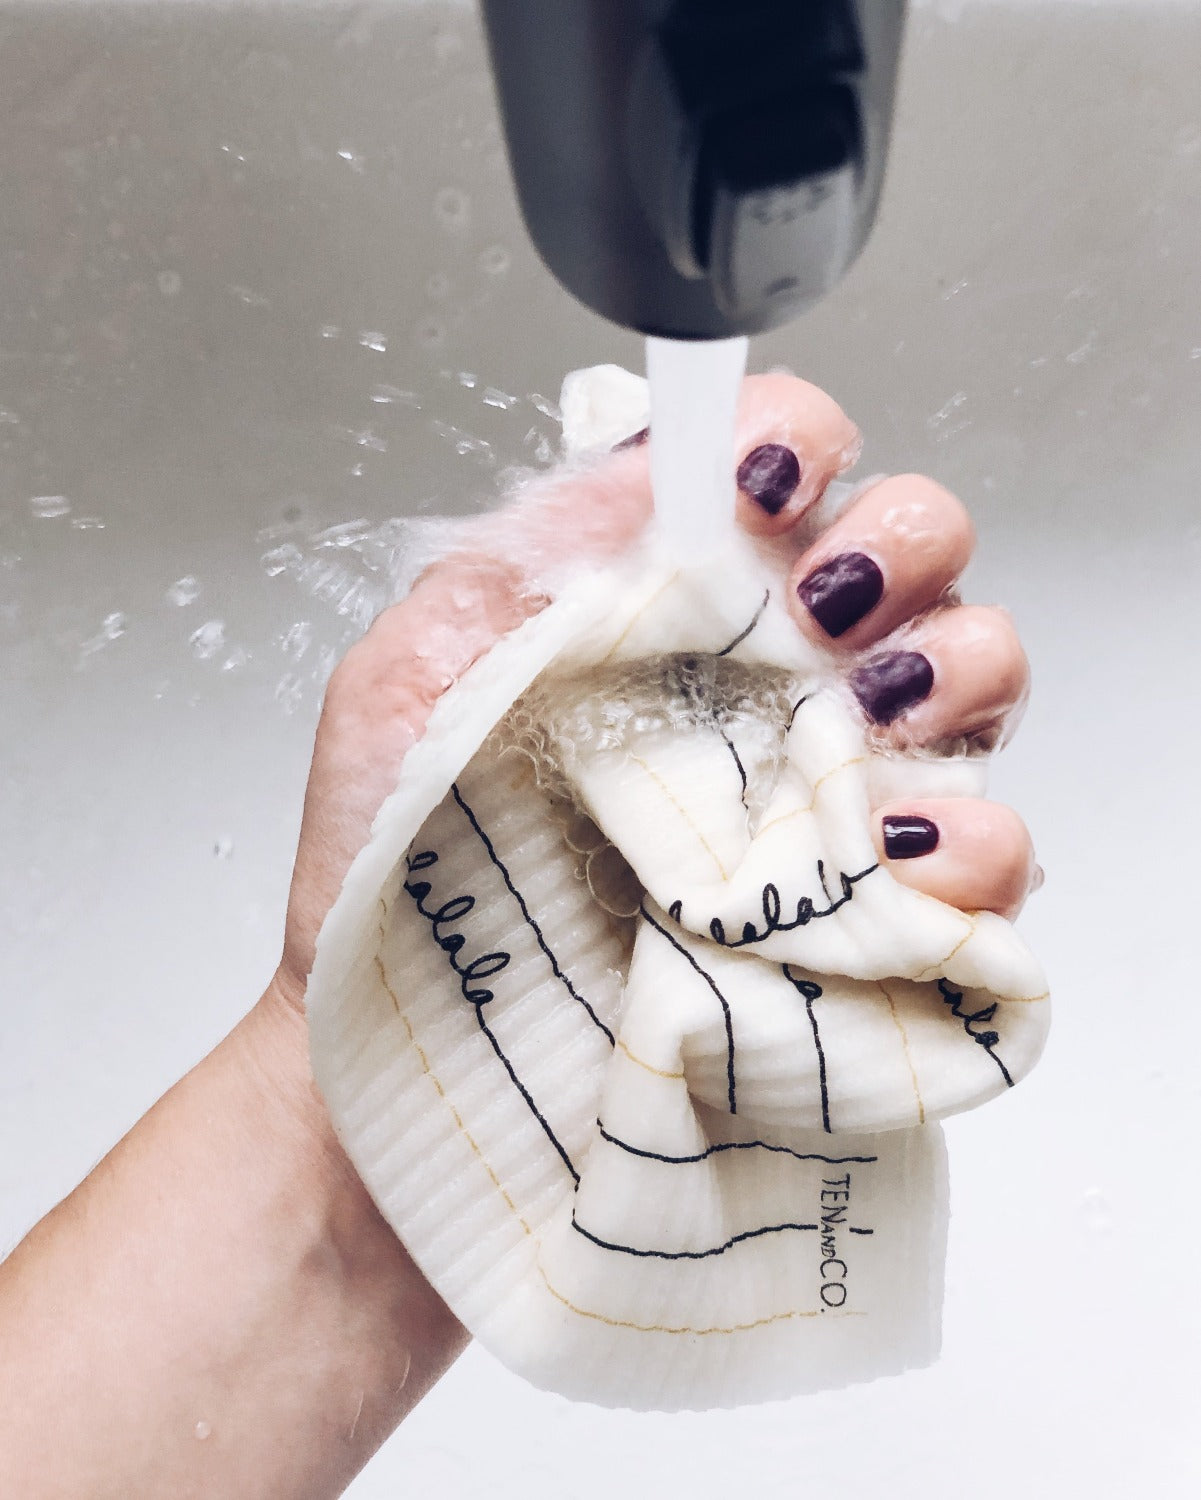 Product image of Falala in Black and Gold in a white sink. There is a black faucet coming out of the top of the image. There is water coming out of the faucet onto a hand holding the Falala Black and Gold sponge cloth. The hand is squeezing a cloth into a ball. The hand has purple nail polish on the nails. 